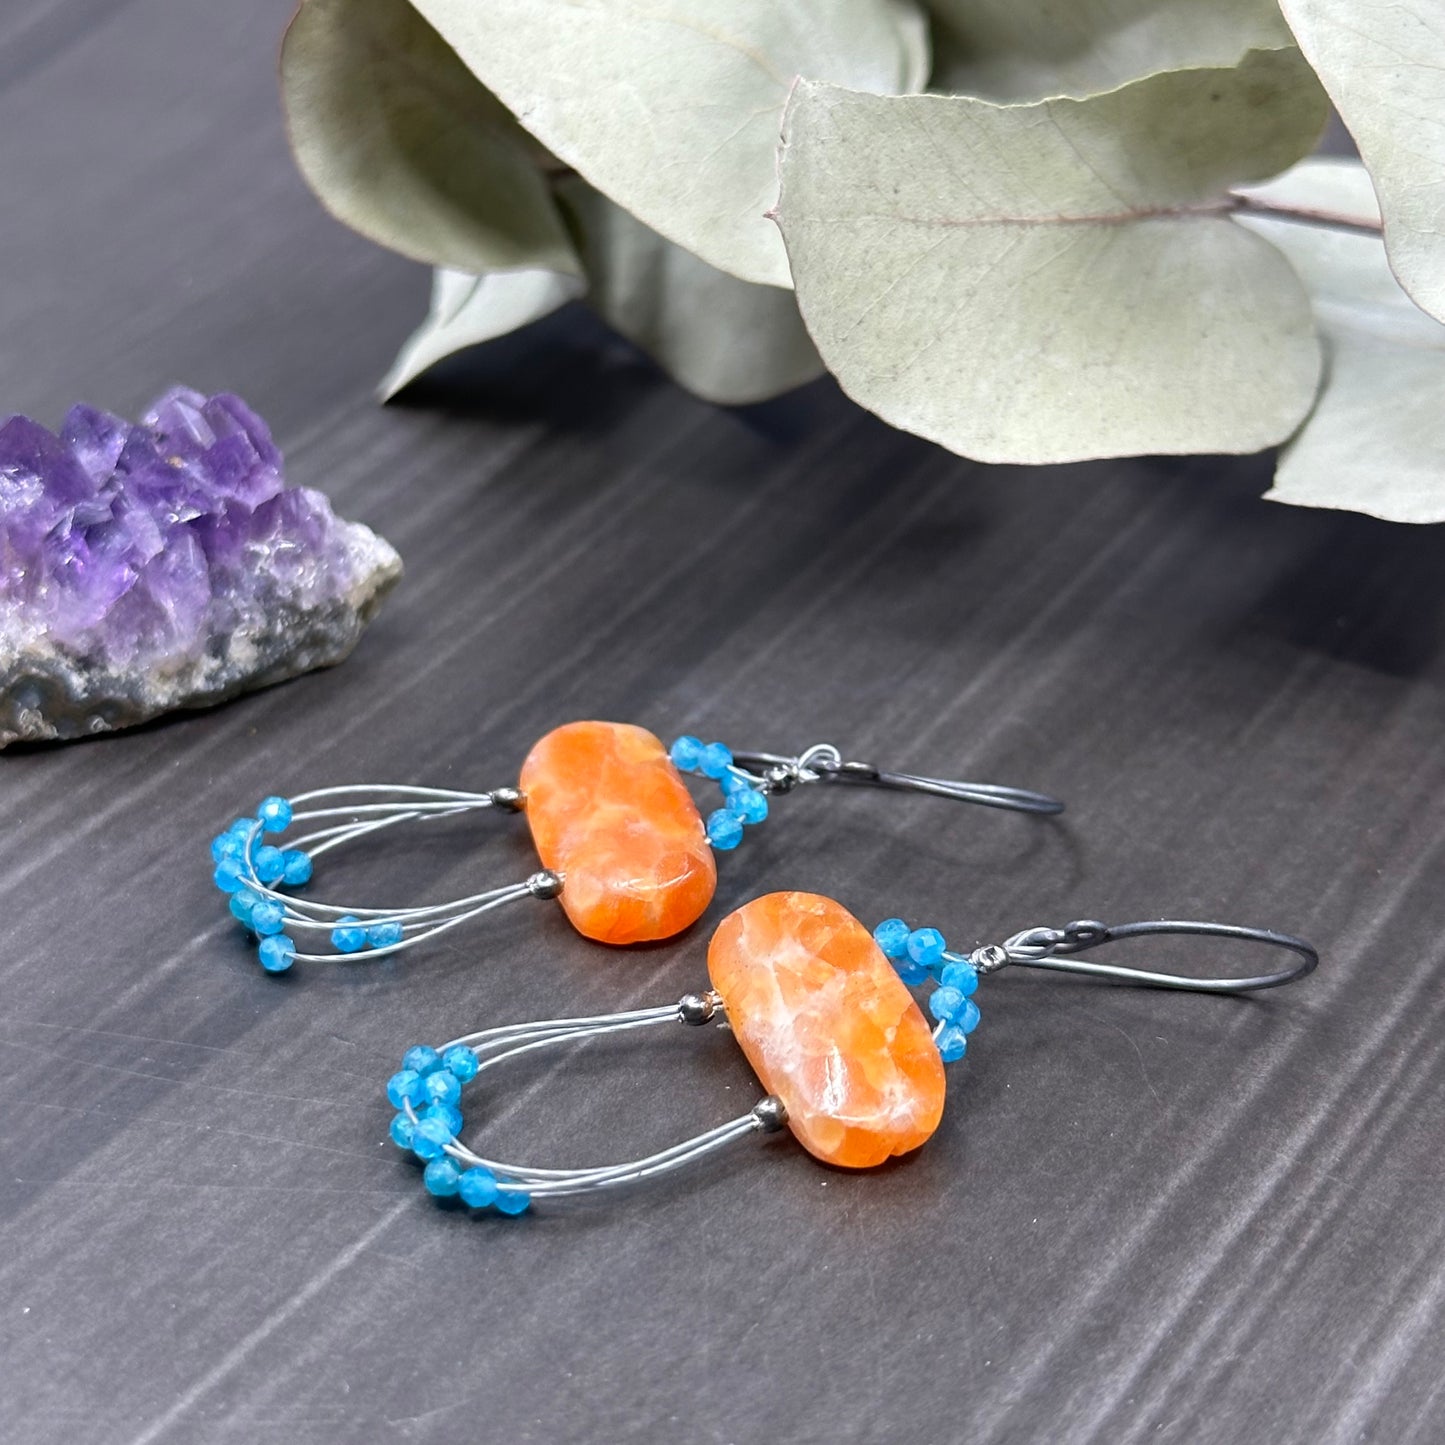 Orange Calcite and Apatite Earrings with Sterling Silver